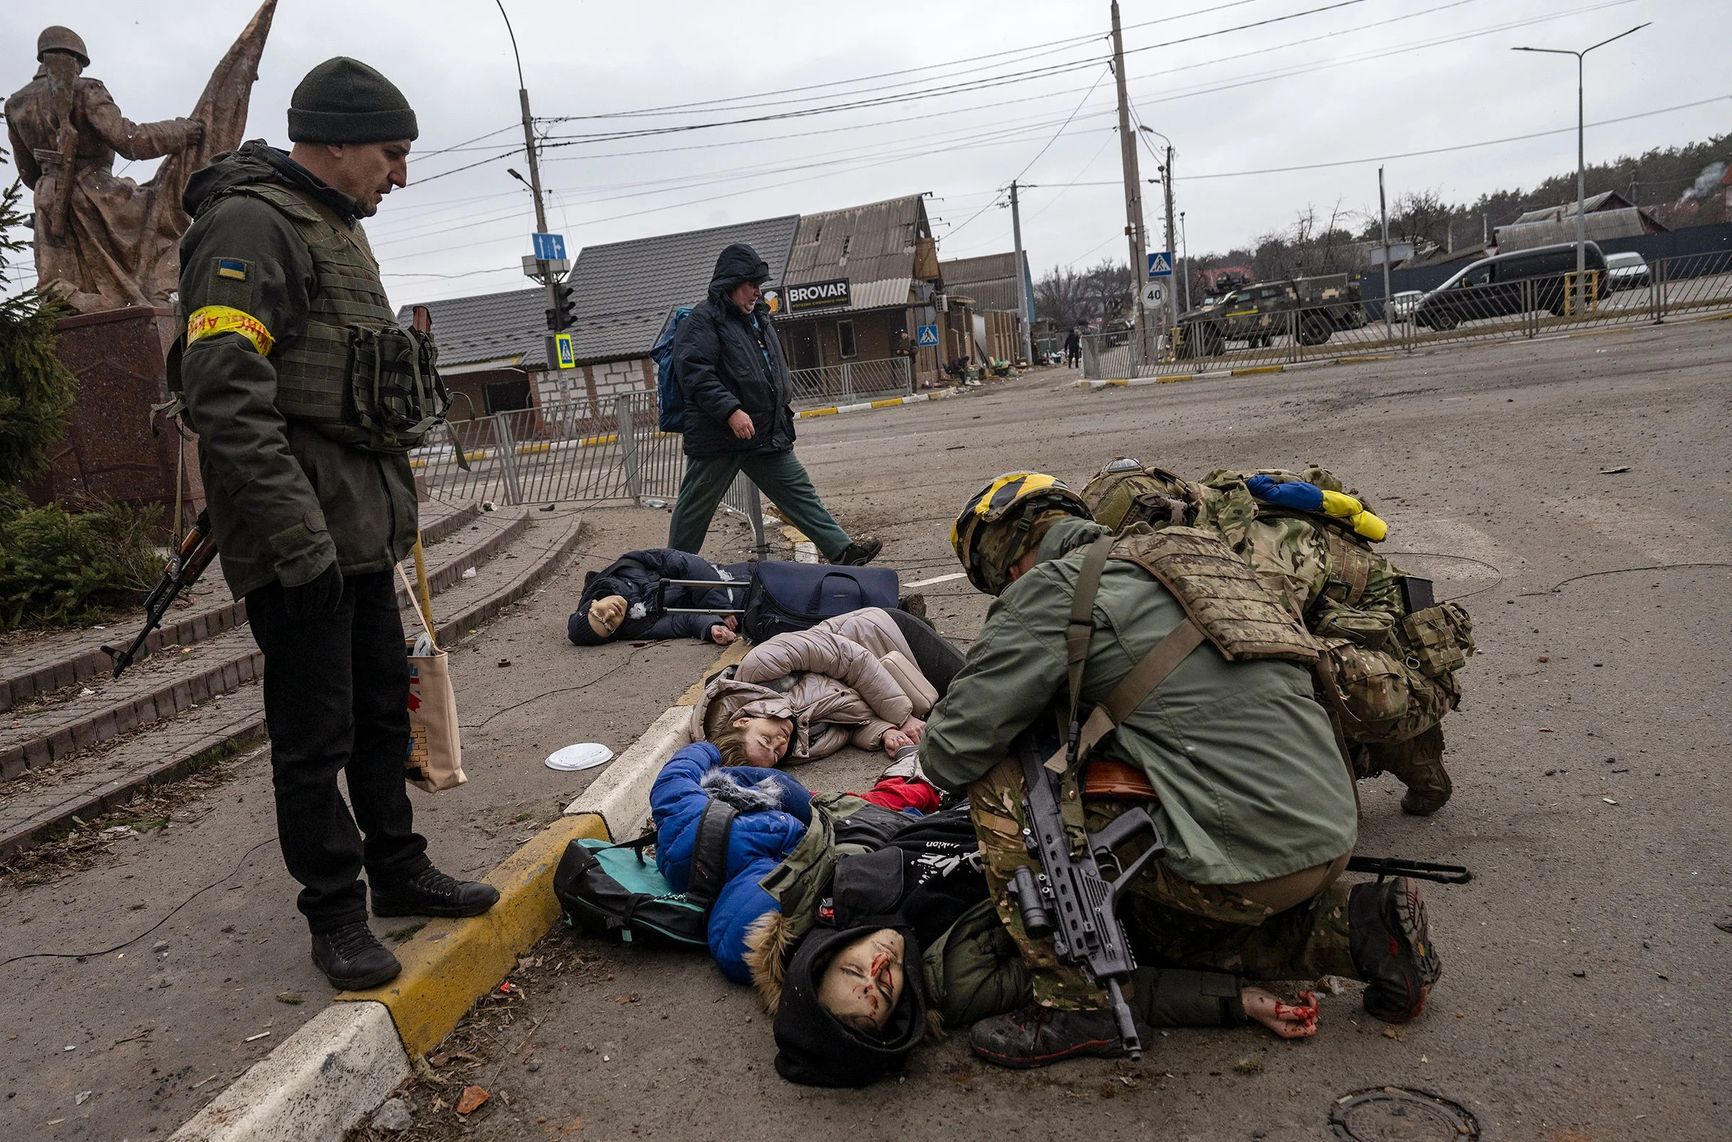 Ukrainian soldiers attend to a group of civilians, including Tetiana Perebyinis and her two children, who were mortally wounded by a Russian mortar round while they evacuated from Irpin, Ukraine, on March 6. A volunteer assisting the family was also killed.